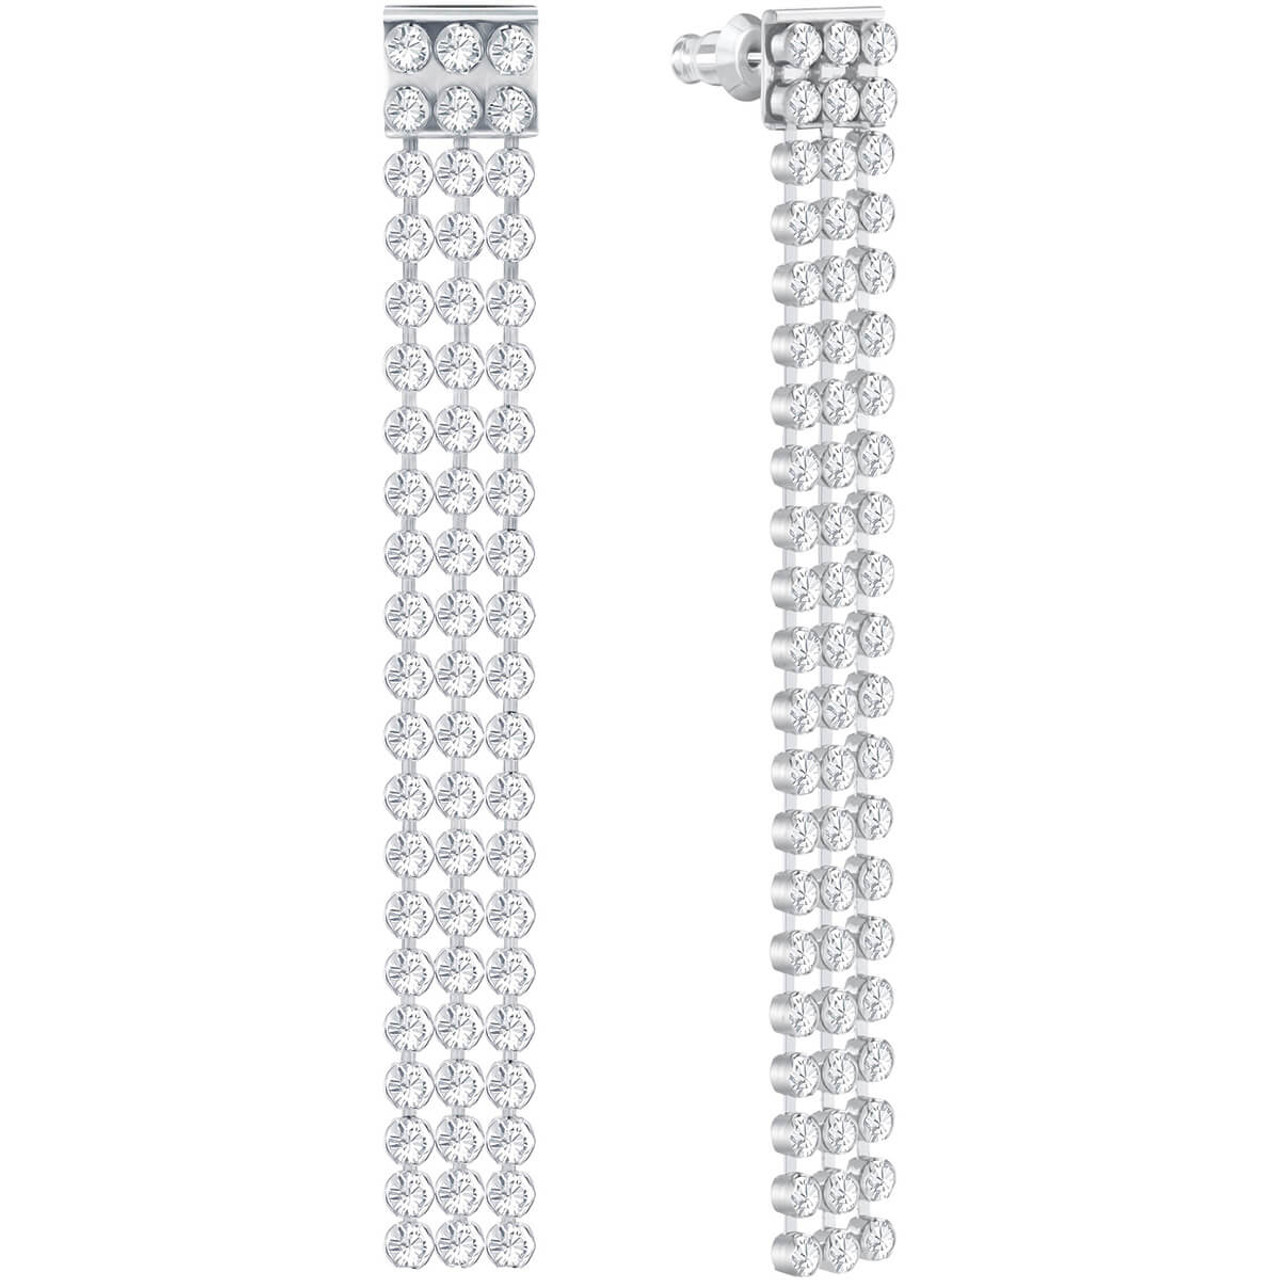 https://cdn11.bigcommerce.com/s-mwyb81onp1/images/stencil/1280x1280/products/1574/9356/swarovski-fit-long-pierced-earrings-white-crystal-chain-cups-5293087__60978.1577654718.jpg?c=2